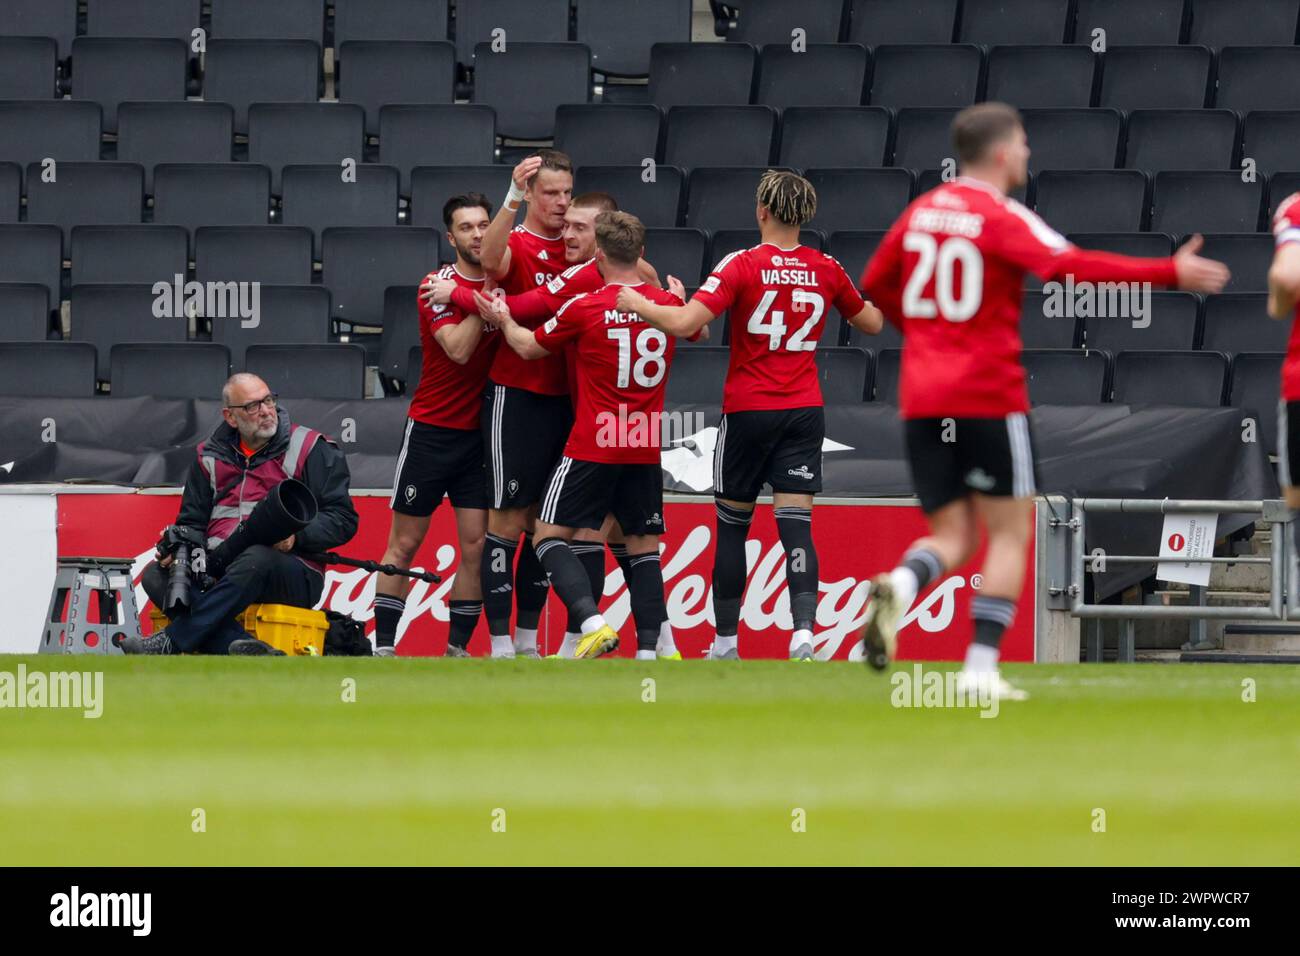 Matt Smith celebrates after scoring for Salford City, to take the lead to make it 1 - 0 against Milton Keynes Dons, during the first half of the Sky Bet League 2 match between MK Dons and Salford City at Stadium MK, Milton Keynes on Friday 8th March 2024. (Photo: John Cripps | MI News) Credit: MI News & Sport /Alamy Live News Stock Photo